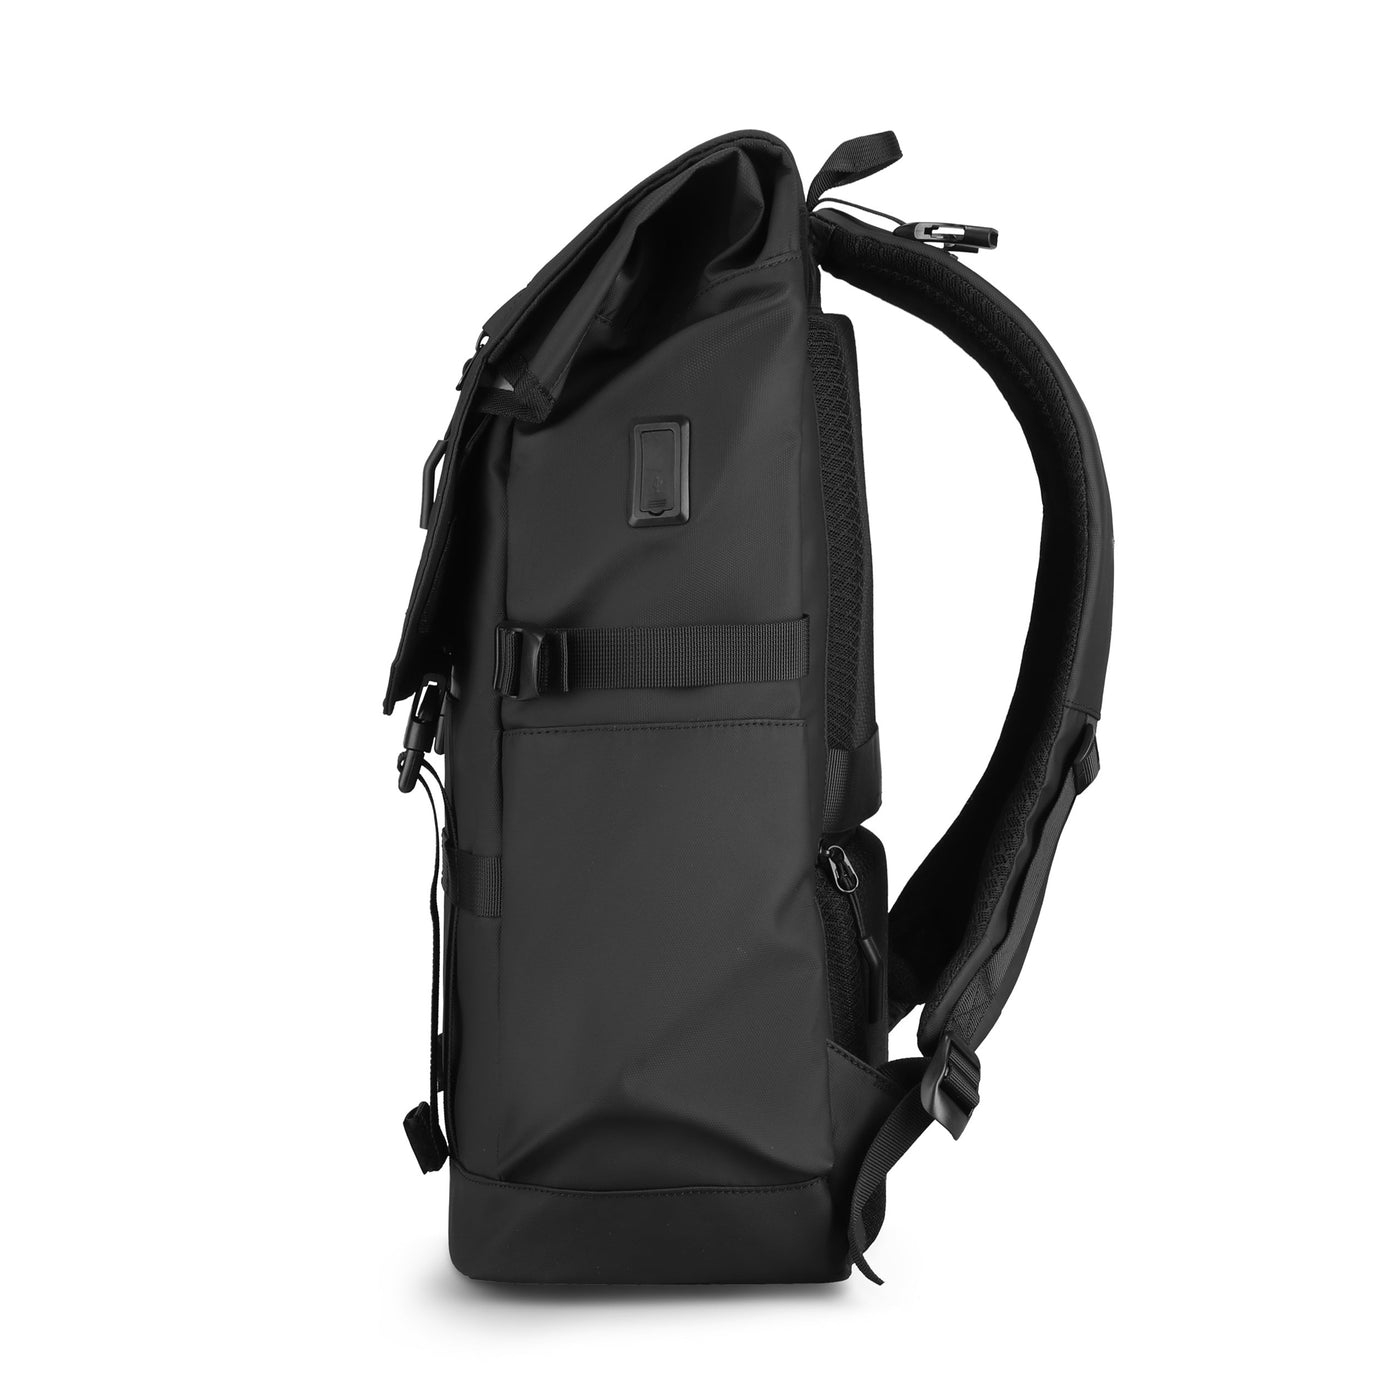 Mark Ryden Black Daily and office use laptop backpack